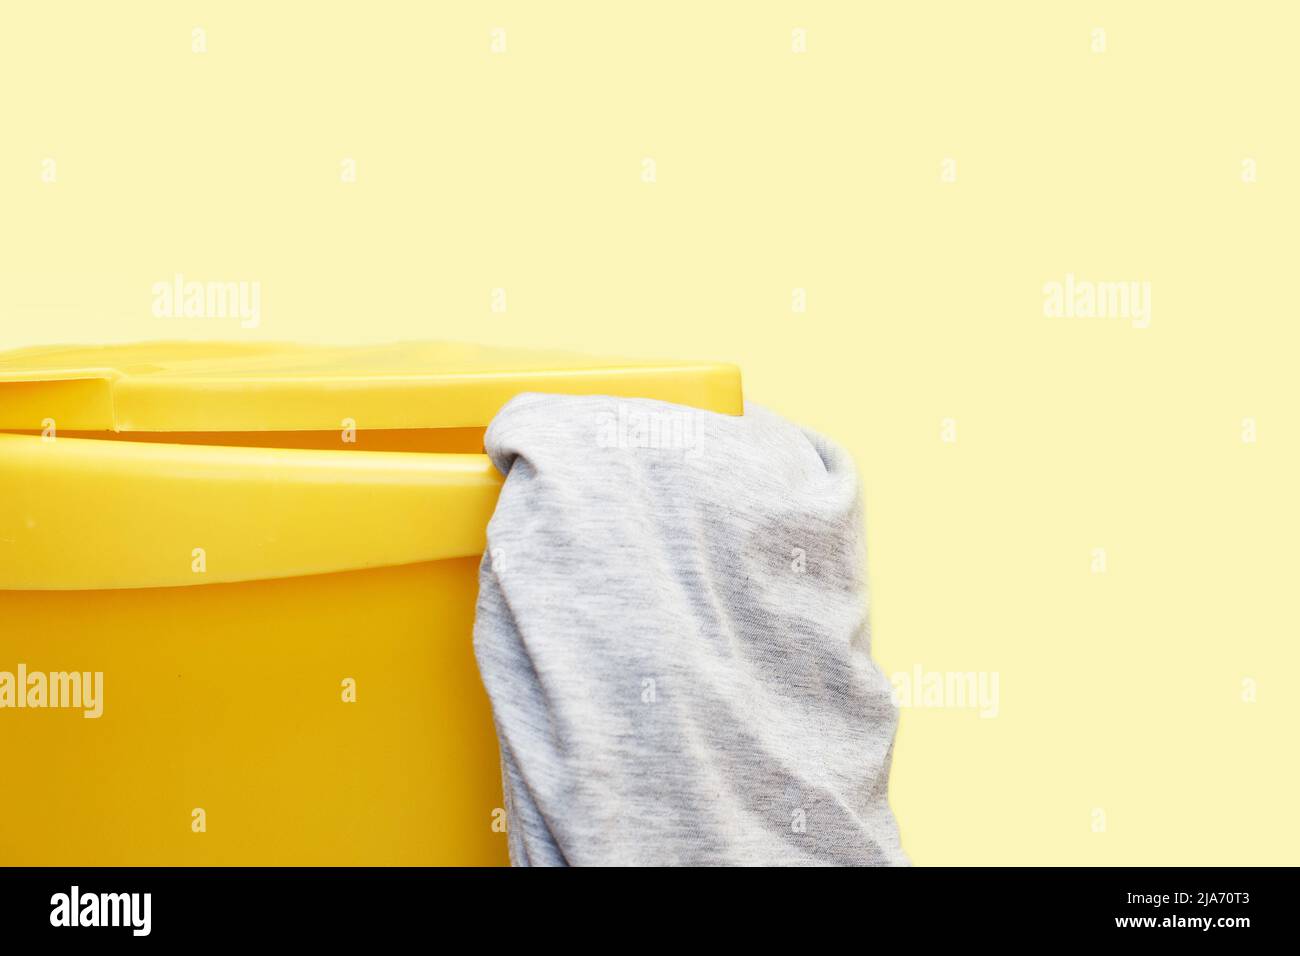 Yellow plastic laundry basket with gray clothing on a yellow background Stock Photo